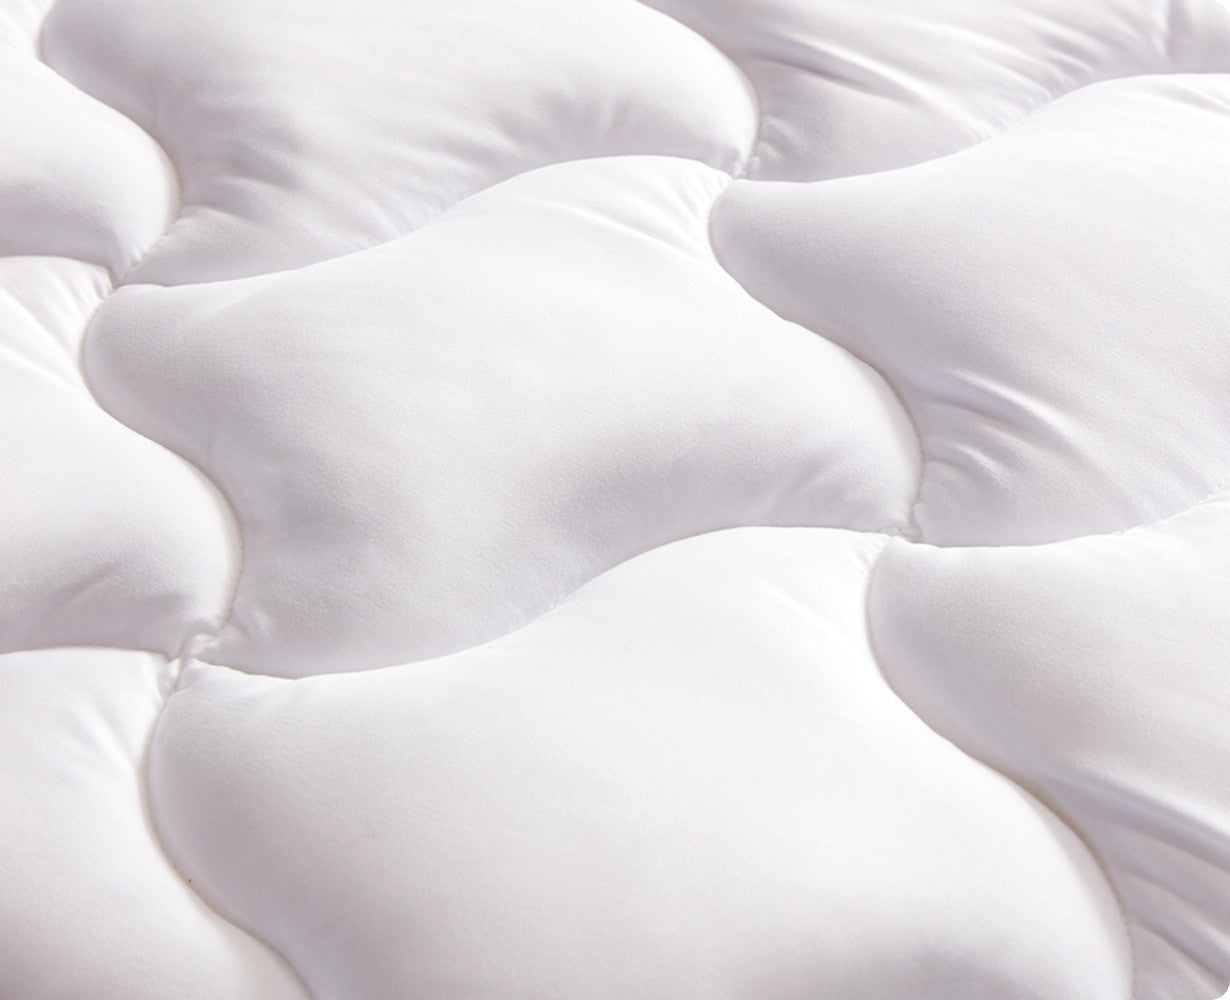 White SLEEP ZONE Luxury Mattress Pad Cover Cooling Cotton Top Overfilled Extra Thick Soft Down Alternative Topper Quilted Pillow Top Upto 21 inch Deep Pocket Twin XL